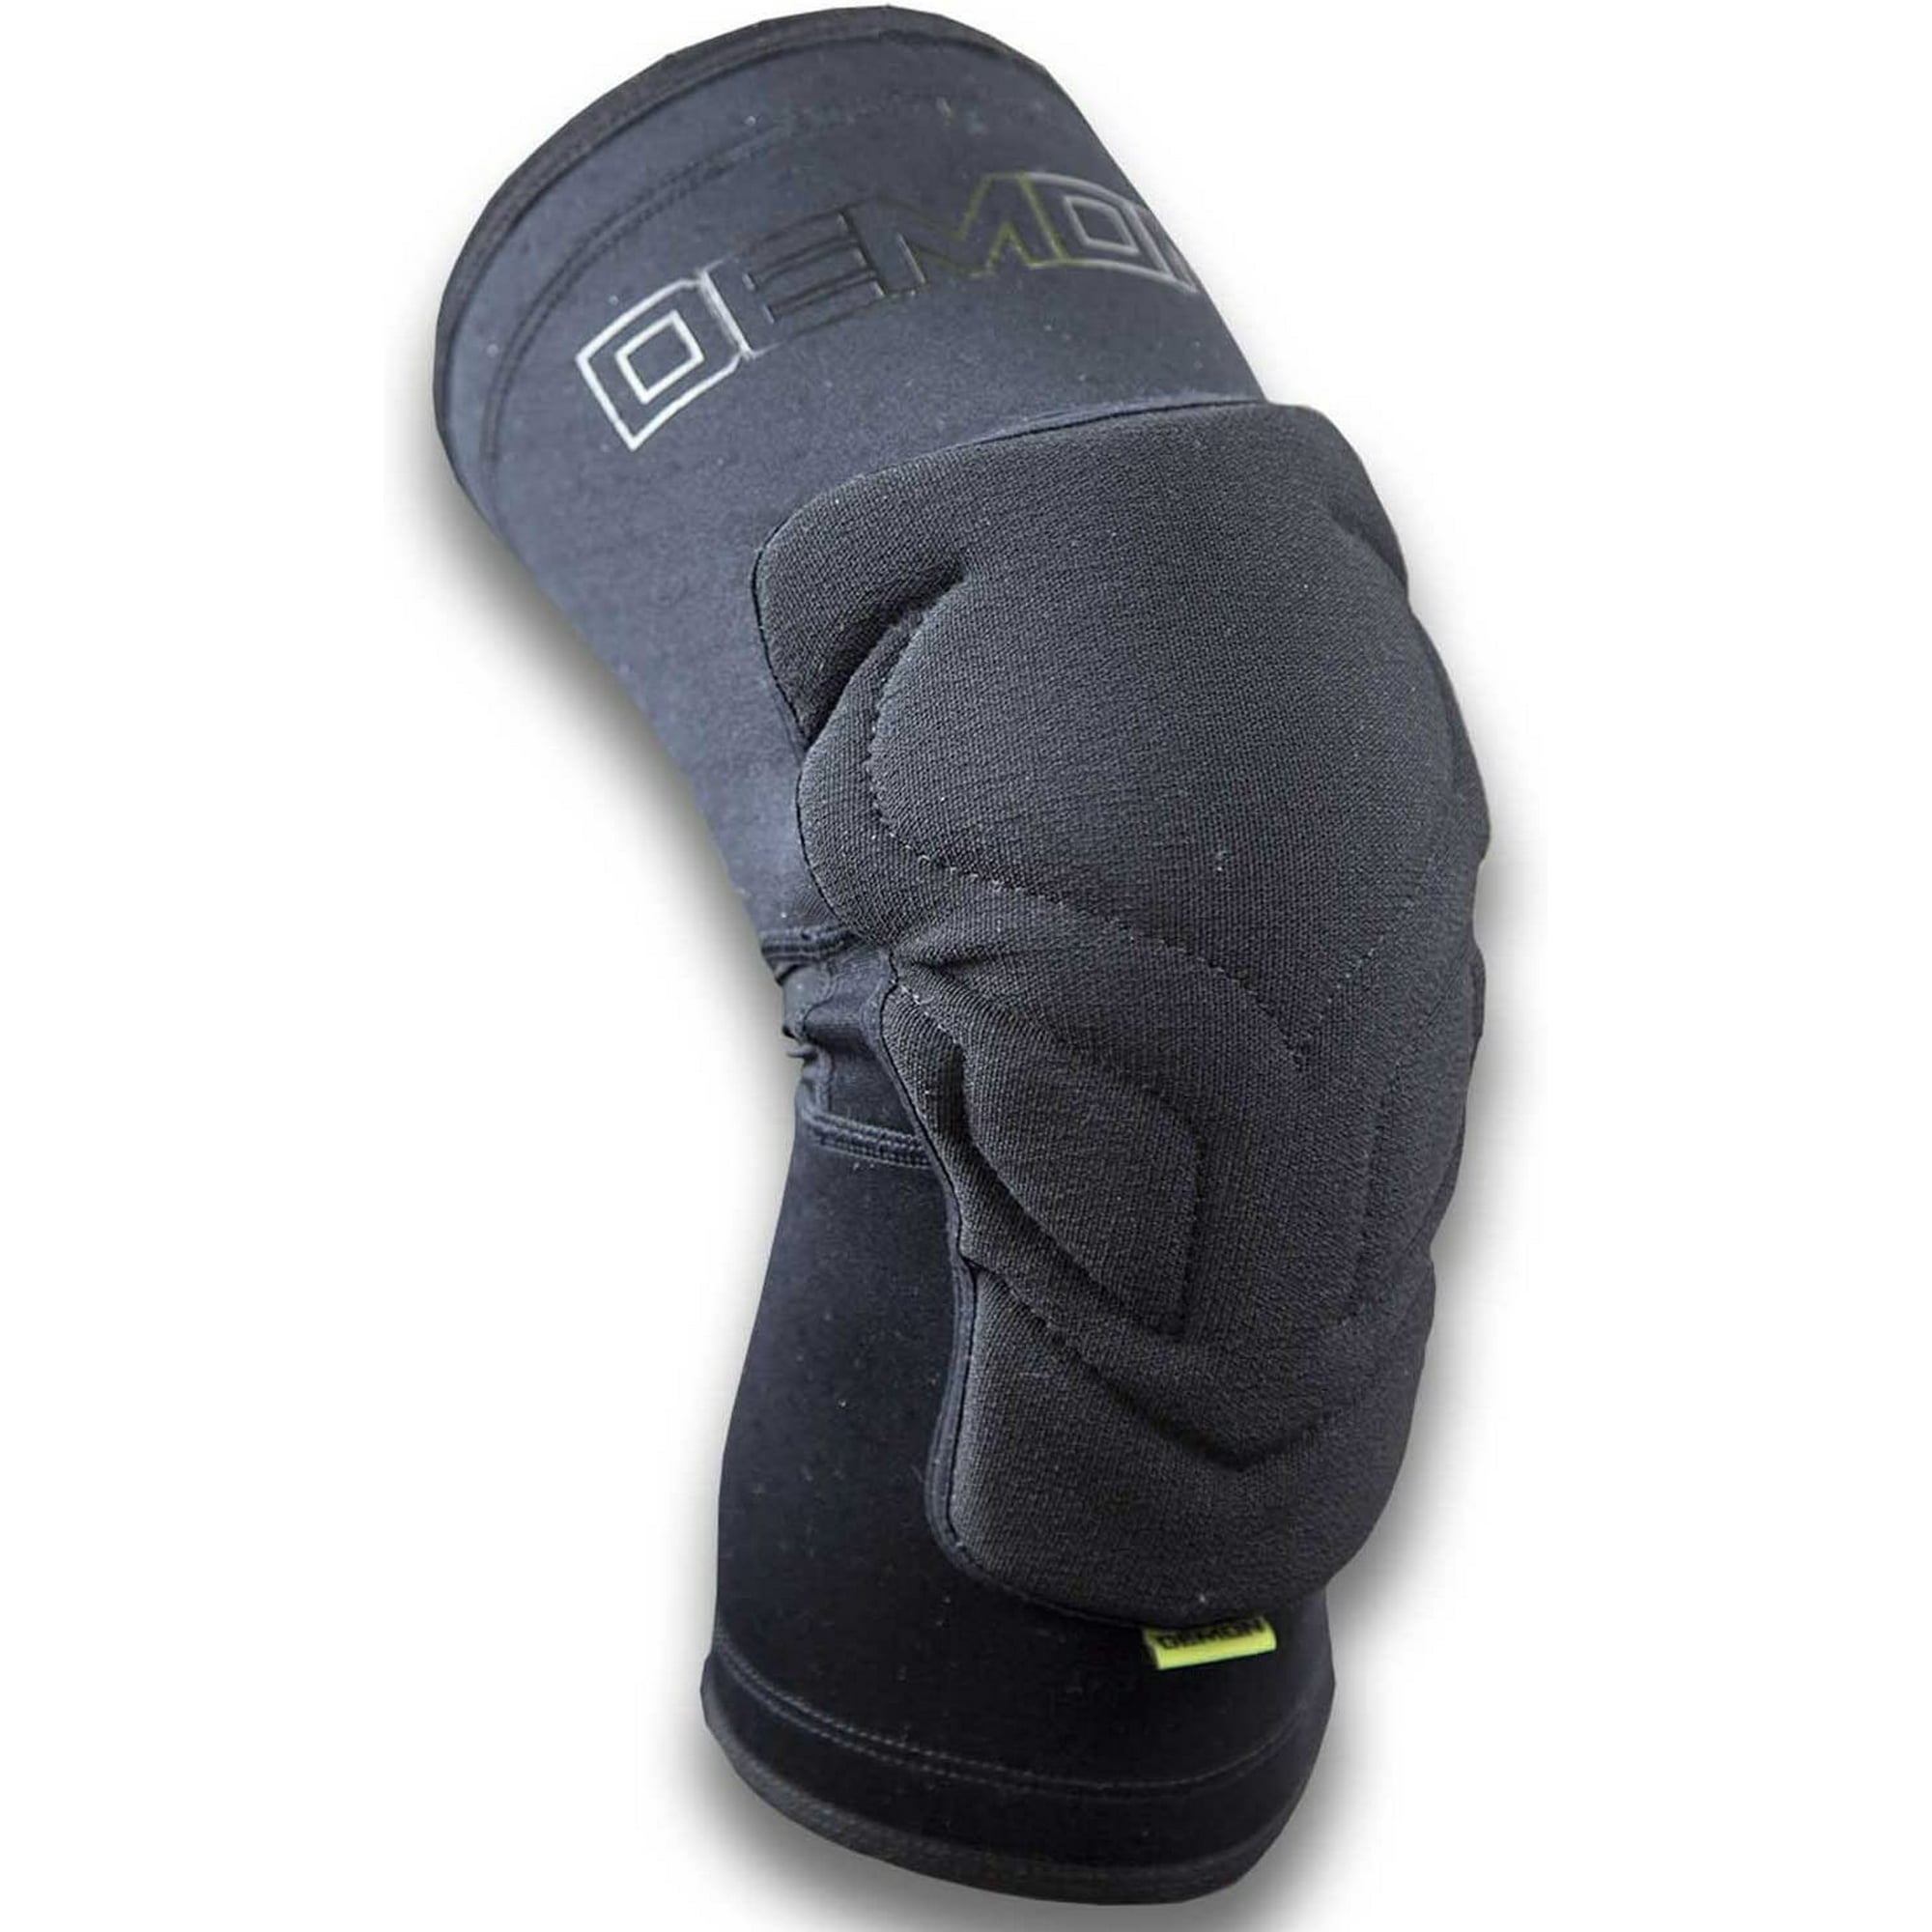 Solve breathe the wind is strong Demon Enduro Mountain Bike Knee Pads|BMX Knee Guards|Snowboard Knee Pads-  Ultralight Edition (Comes as a Pair) | Walmart Canada